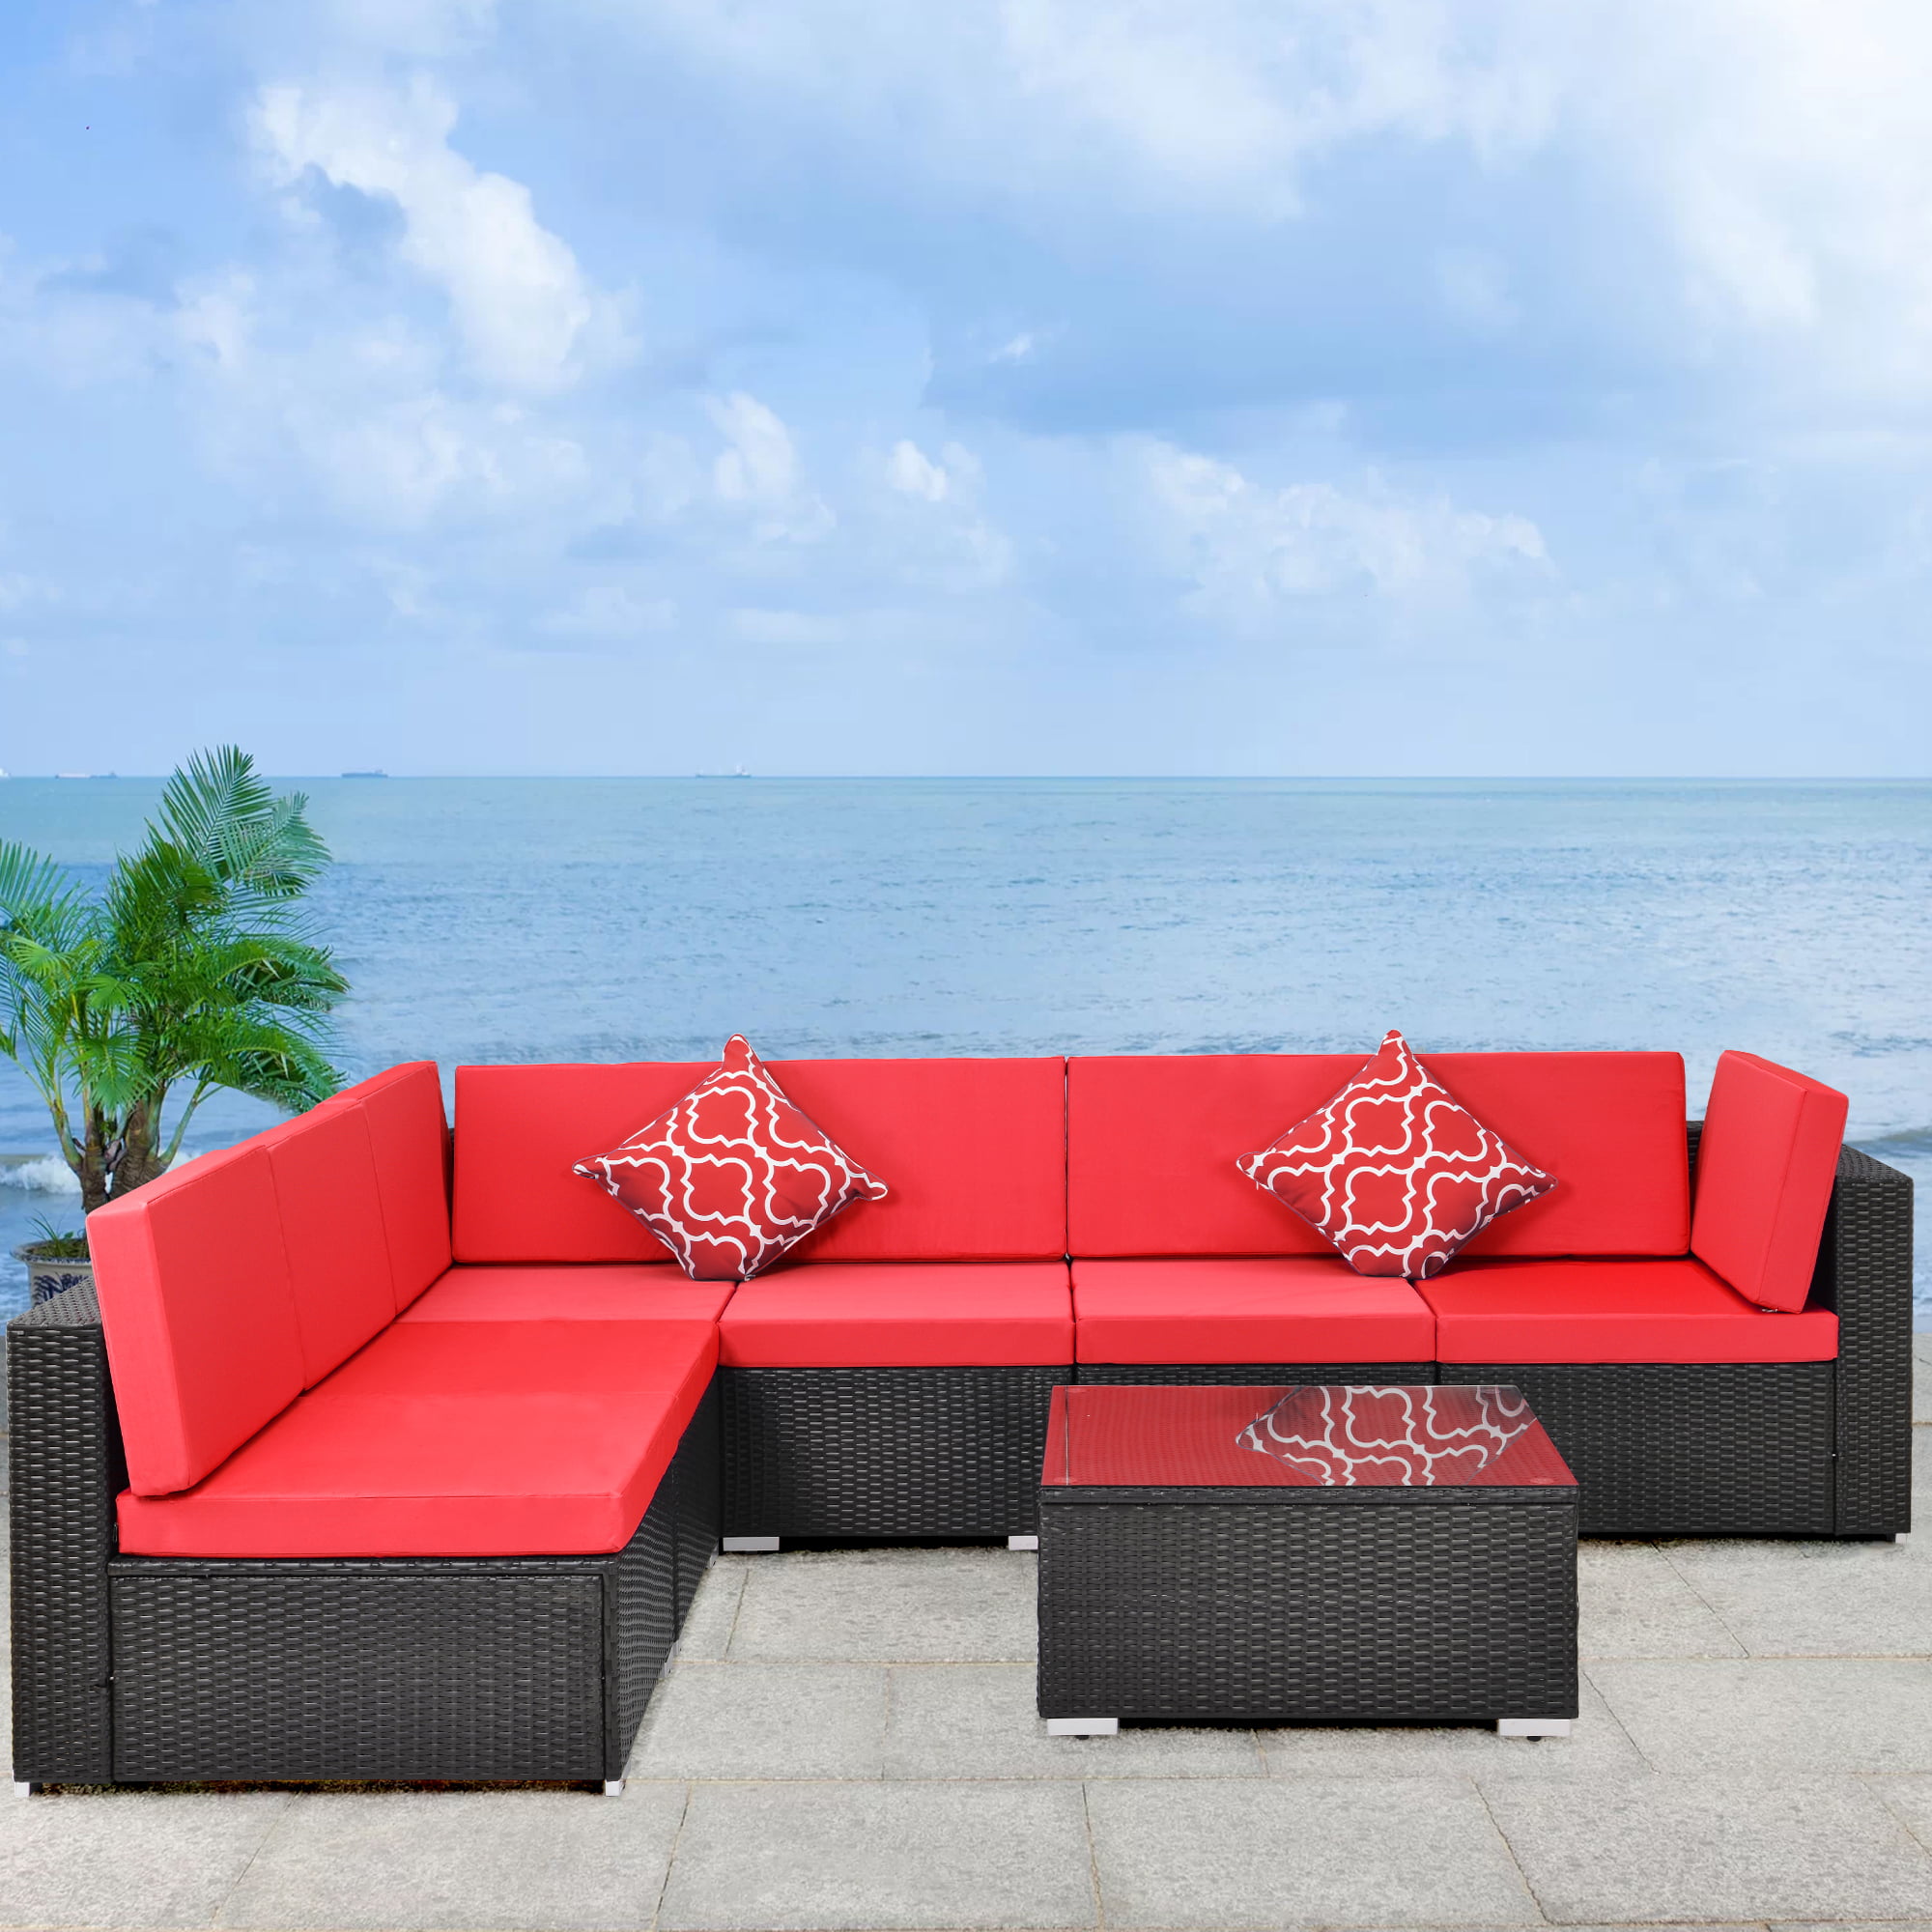 7 Piece Outdoor Patio Furniture Sets, Patio Furniture Sets Red Cushions